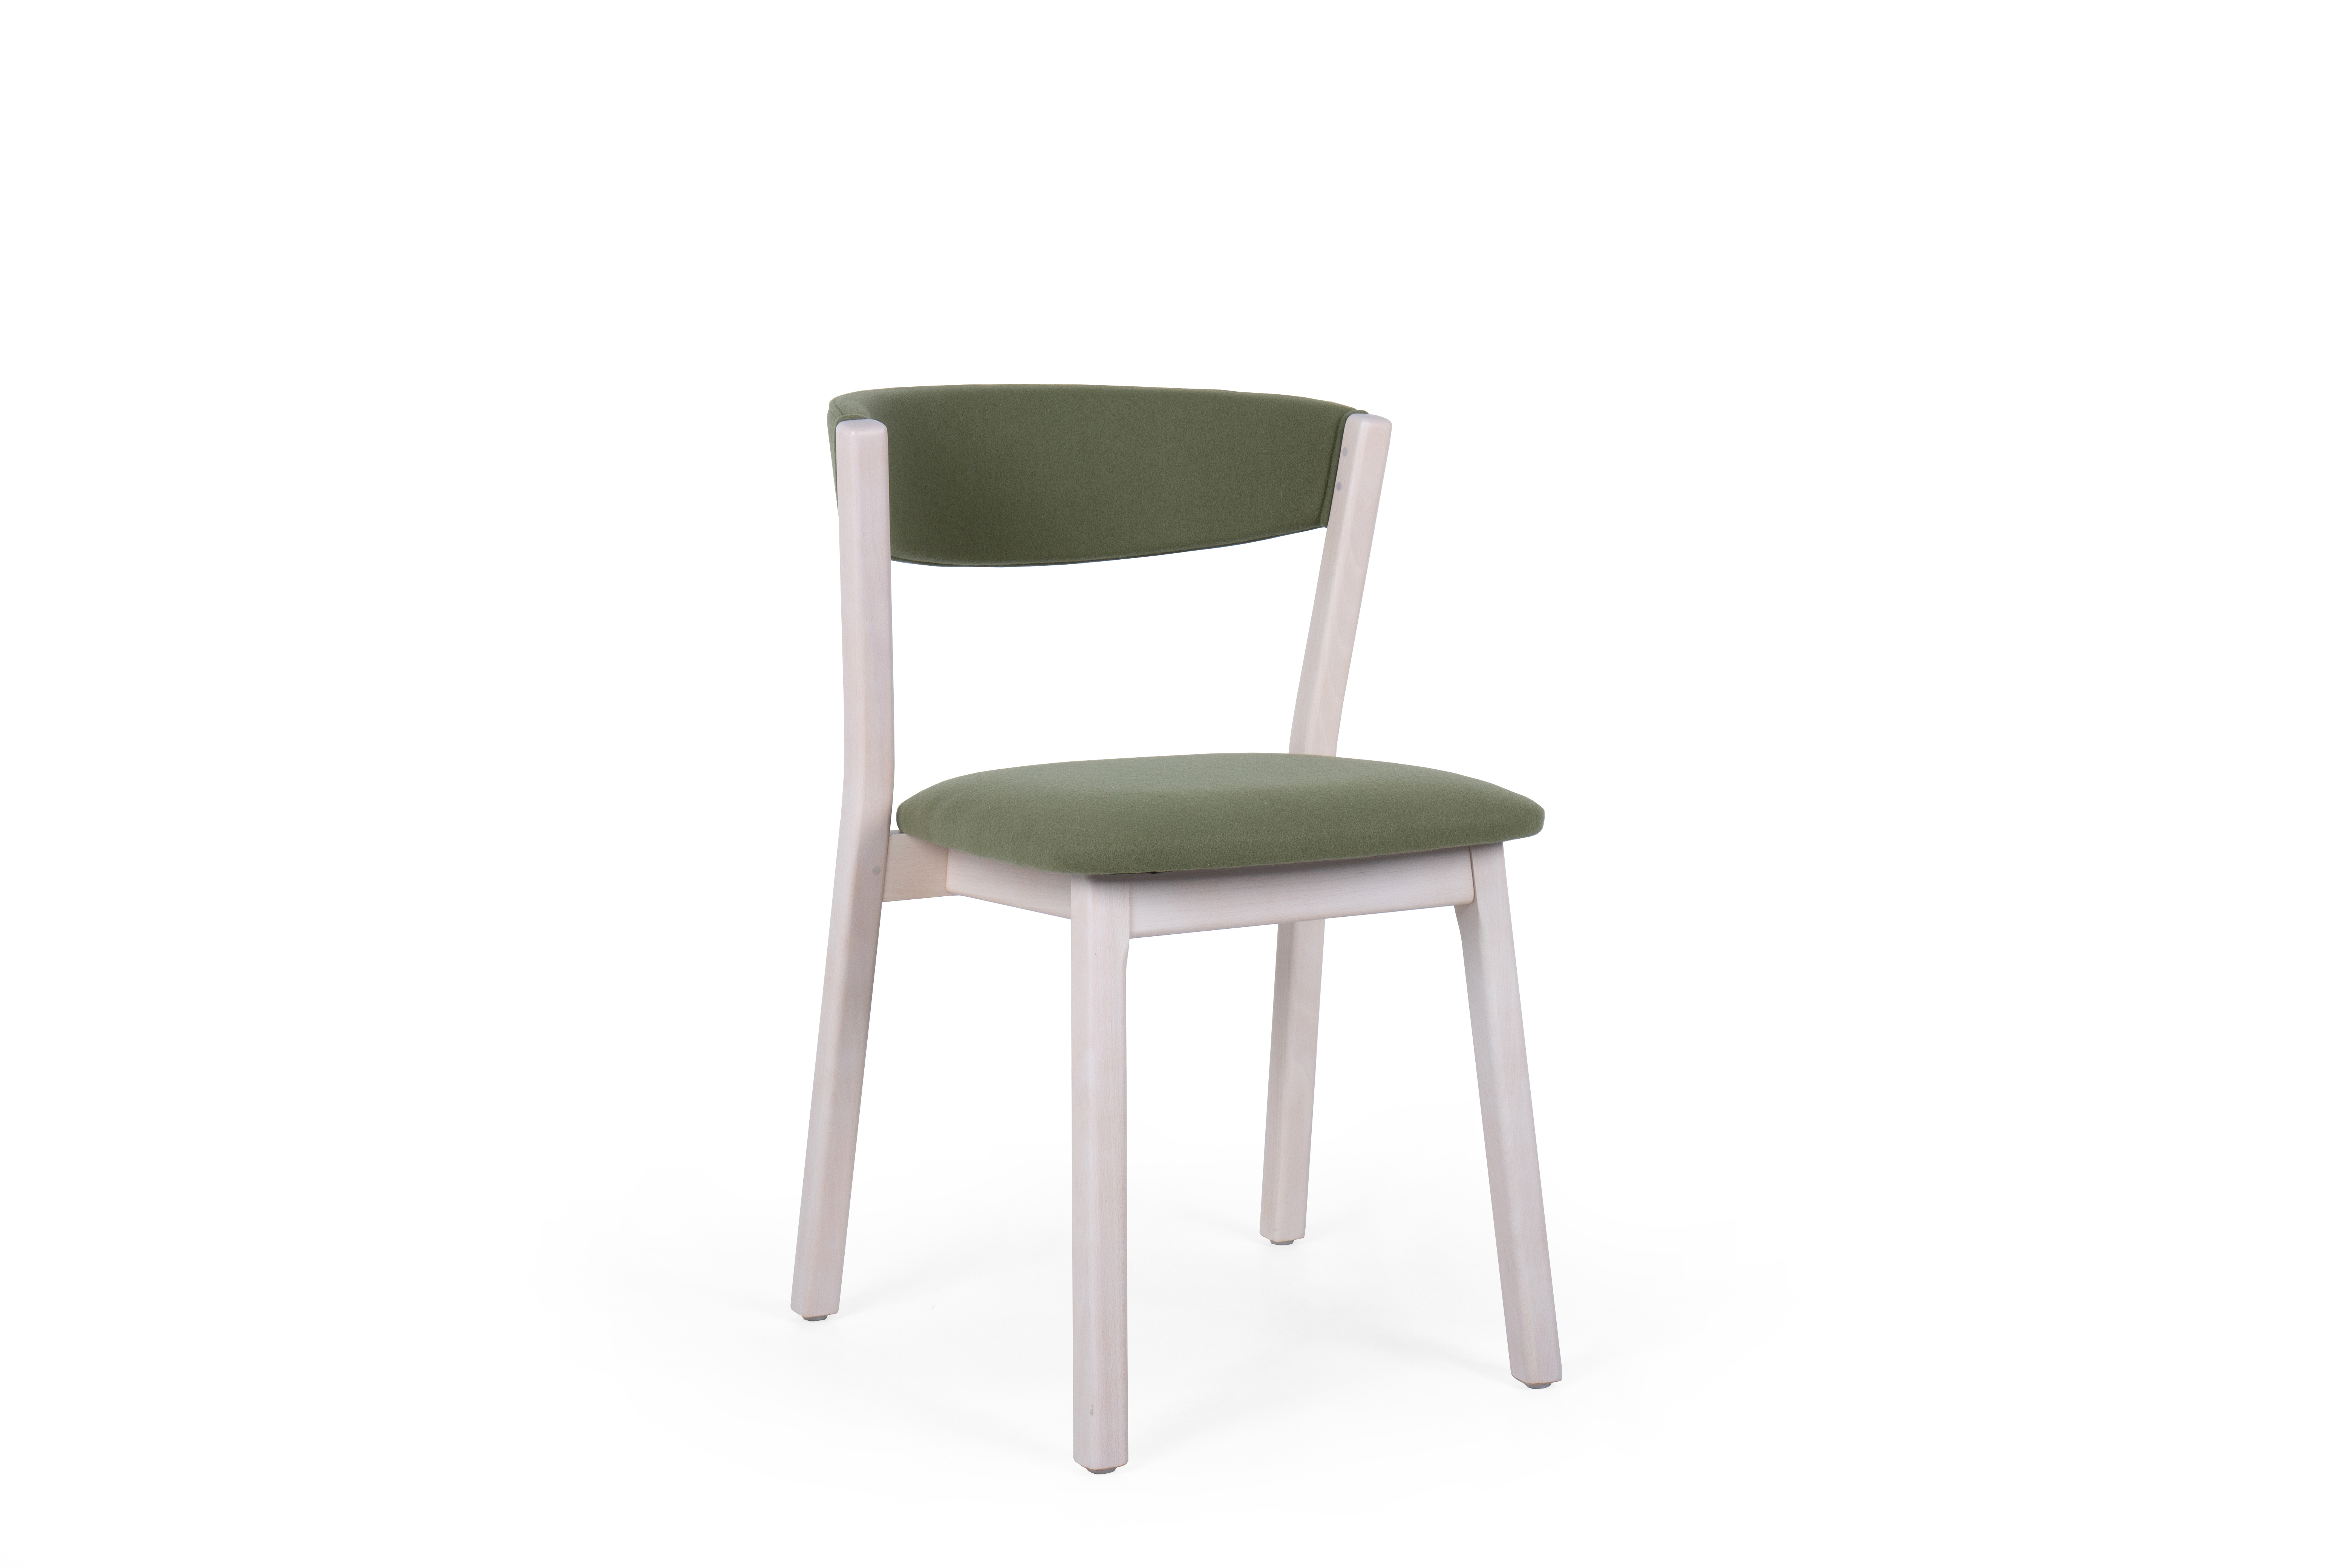 Eva Chair Cafe Seating